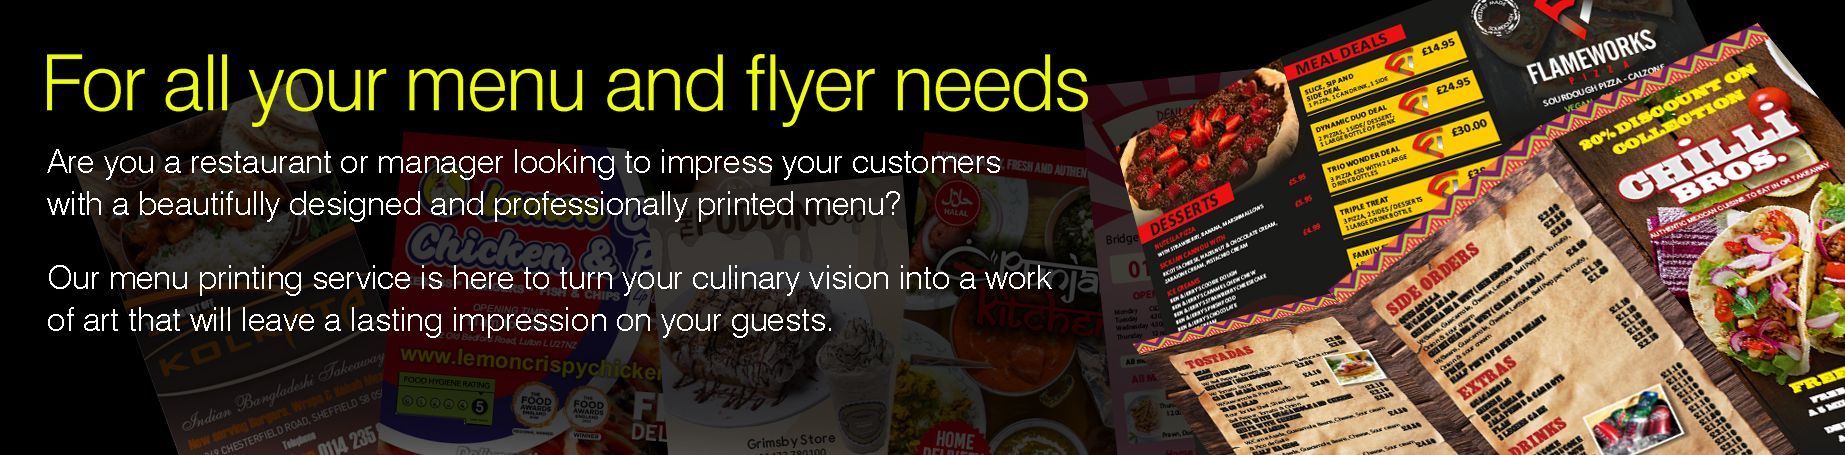 Menuprint : For all your menu and flyer printing